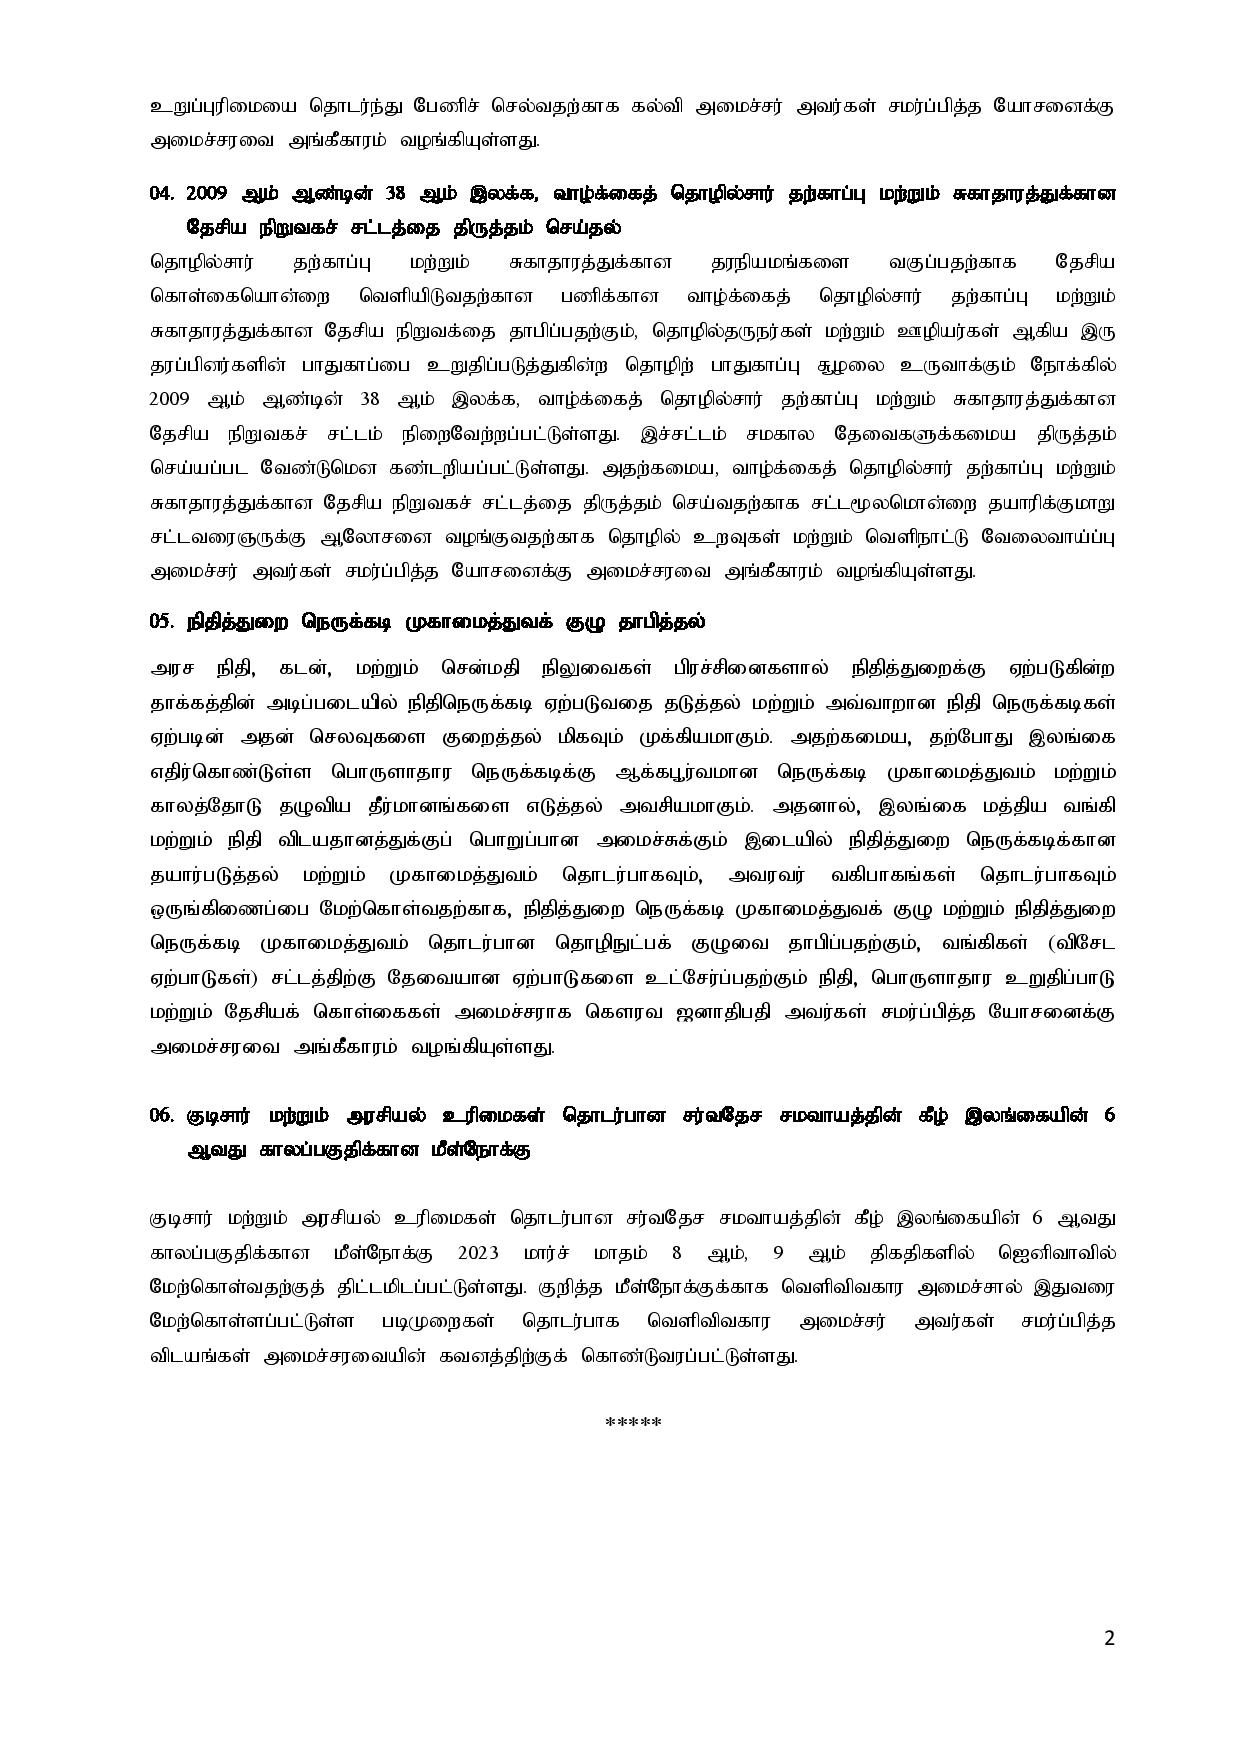 Cabinet Decisions on 07.03.2023 Tamil page 002